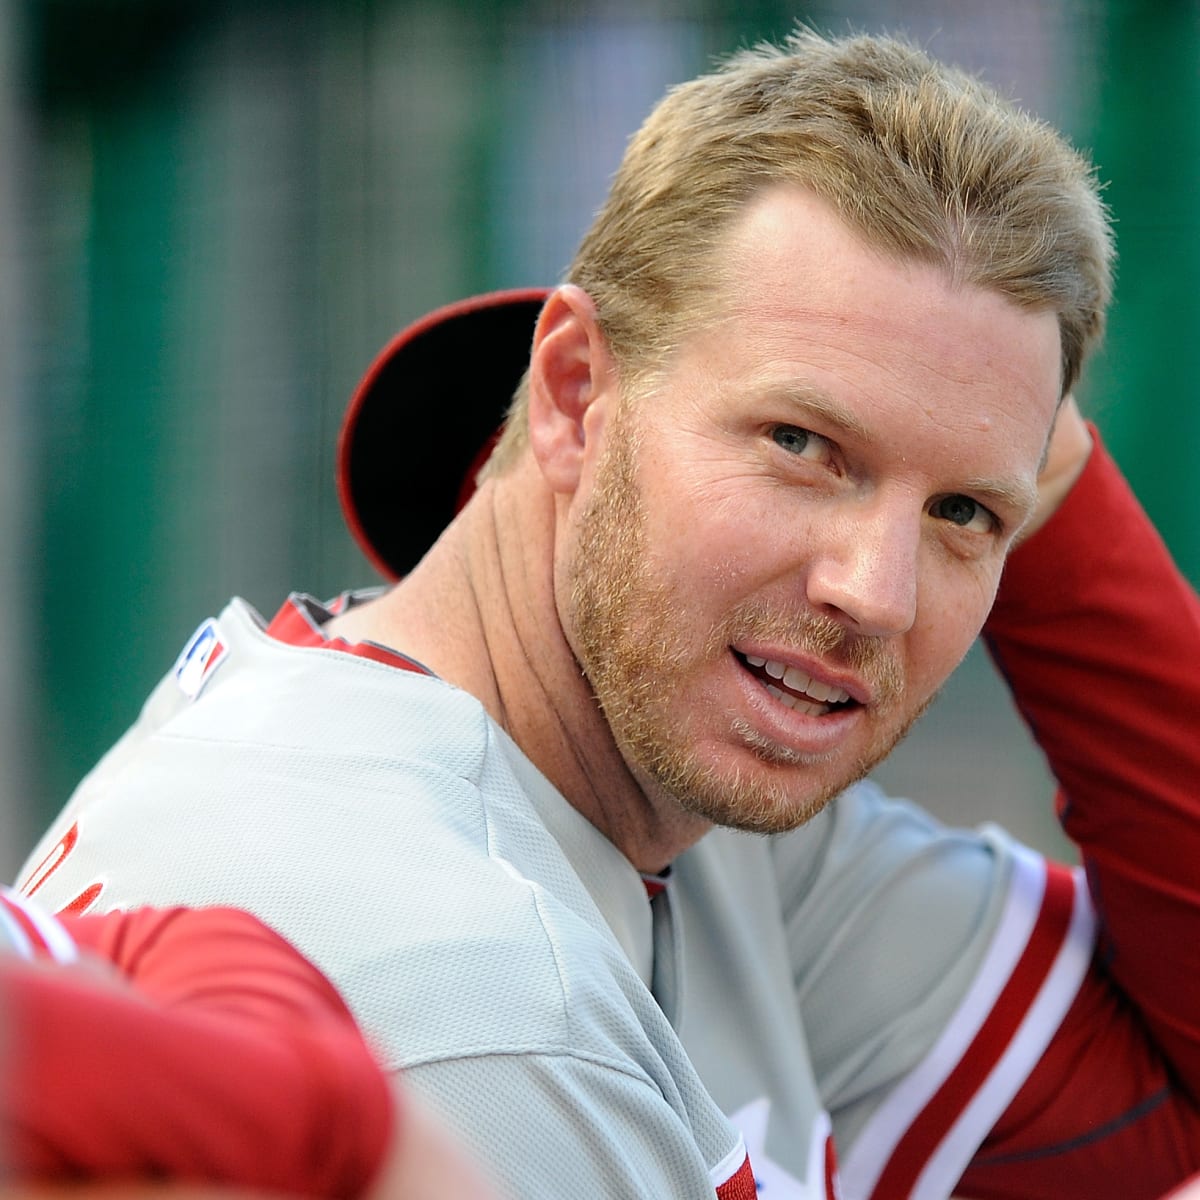 Roy Halladay death: Inside his life after MLB - Sports Illustrated